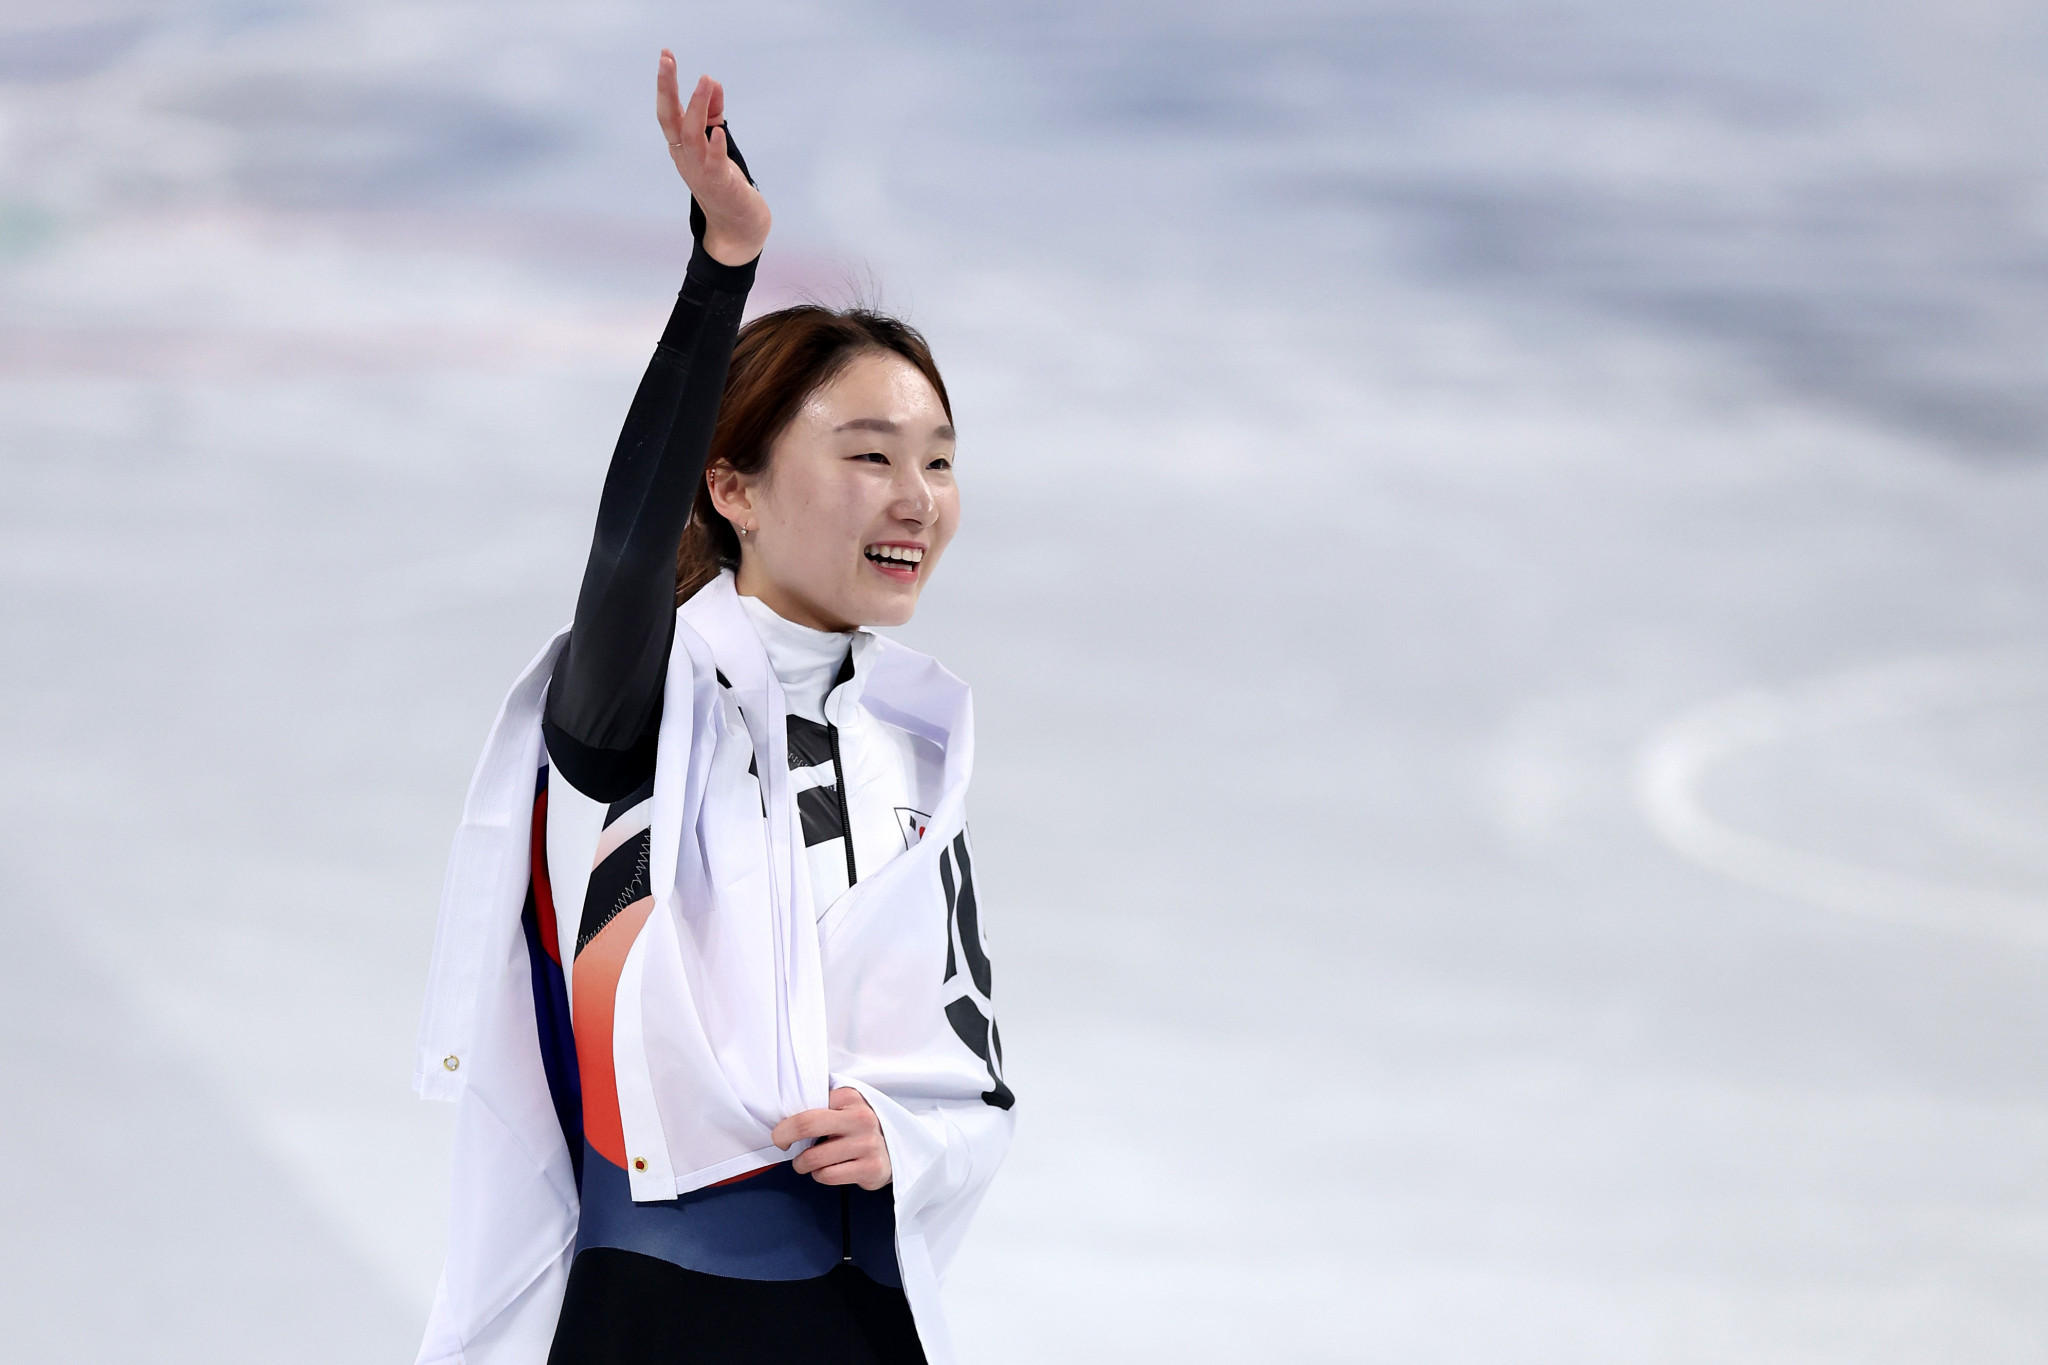 Three-time Olympic champion Choi Min-Jeong won women's 1500m gold as South Korea dominated the short-track speed skating competition in Lake Placid ©Getty Images